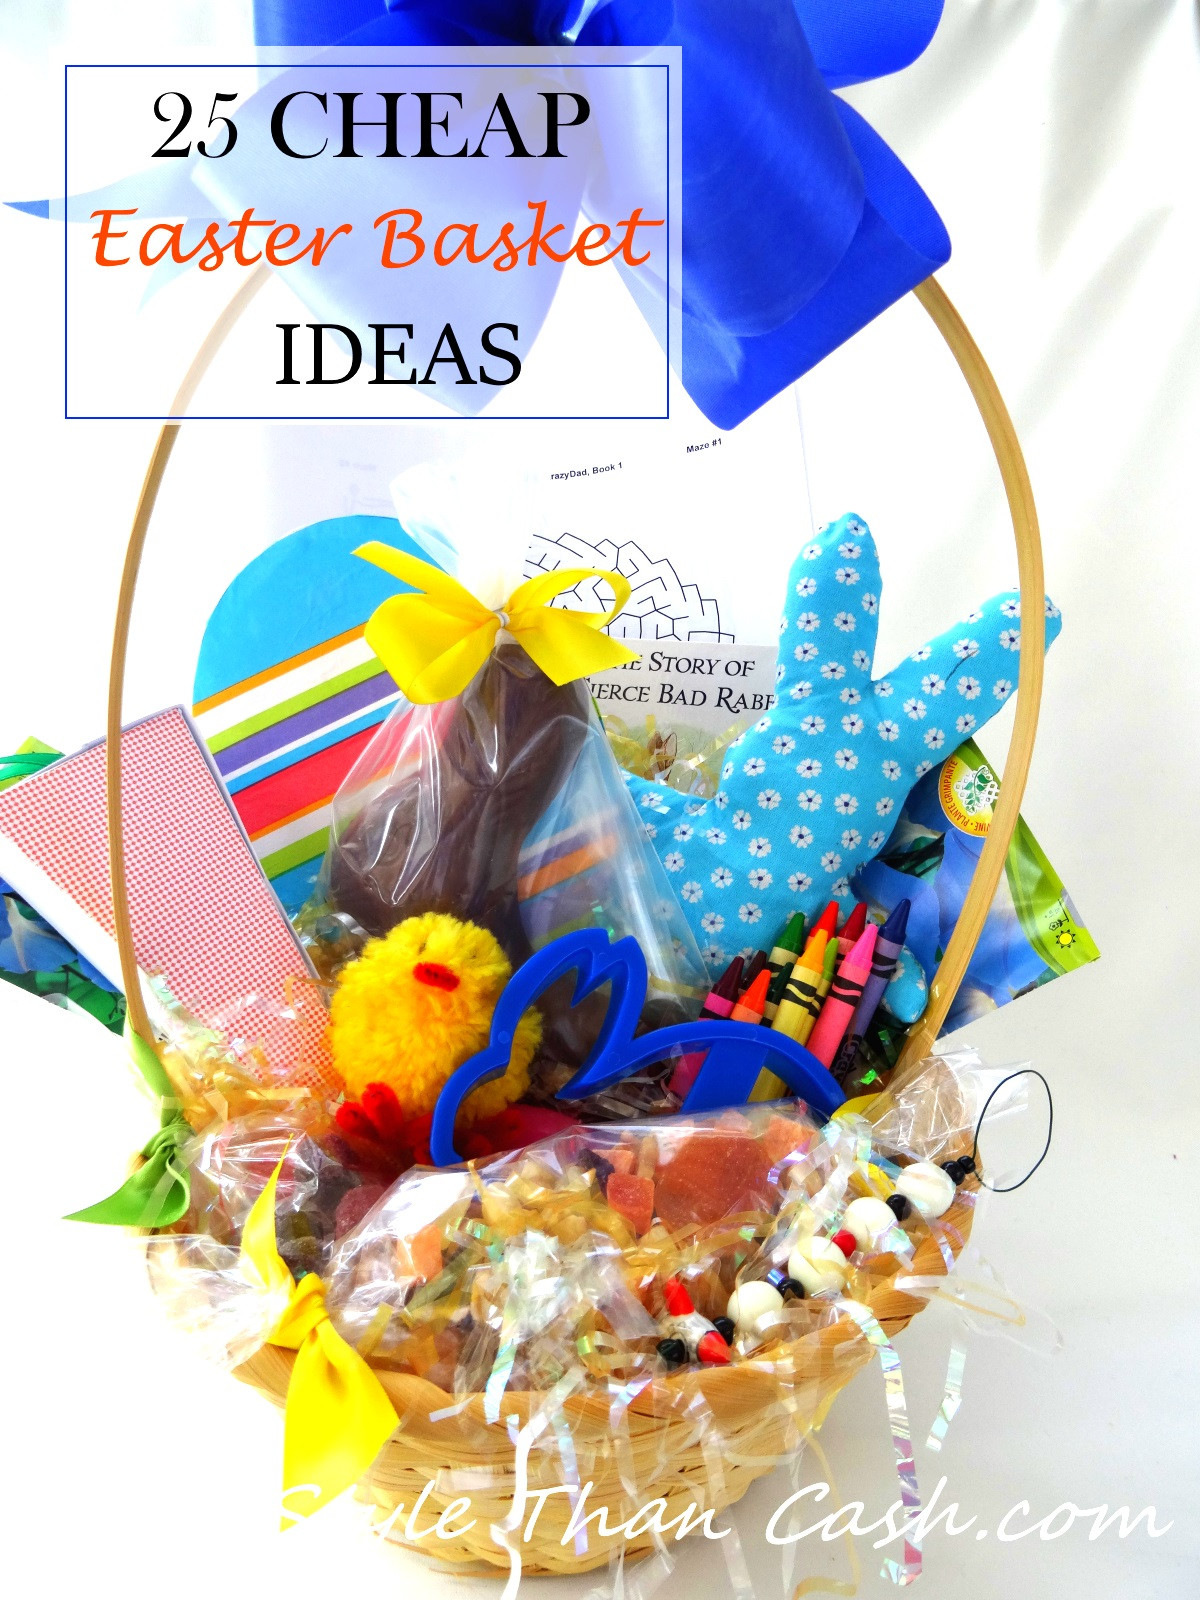 Inexpensive Gift Baskets Ideas
 Make Inexpensive Gift Baskets that Look Expensive